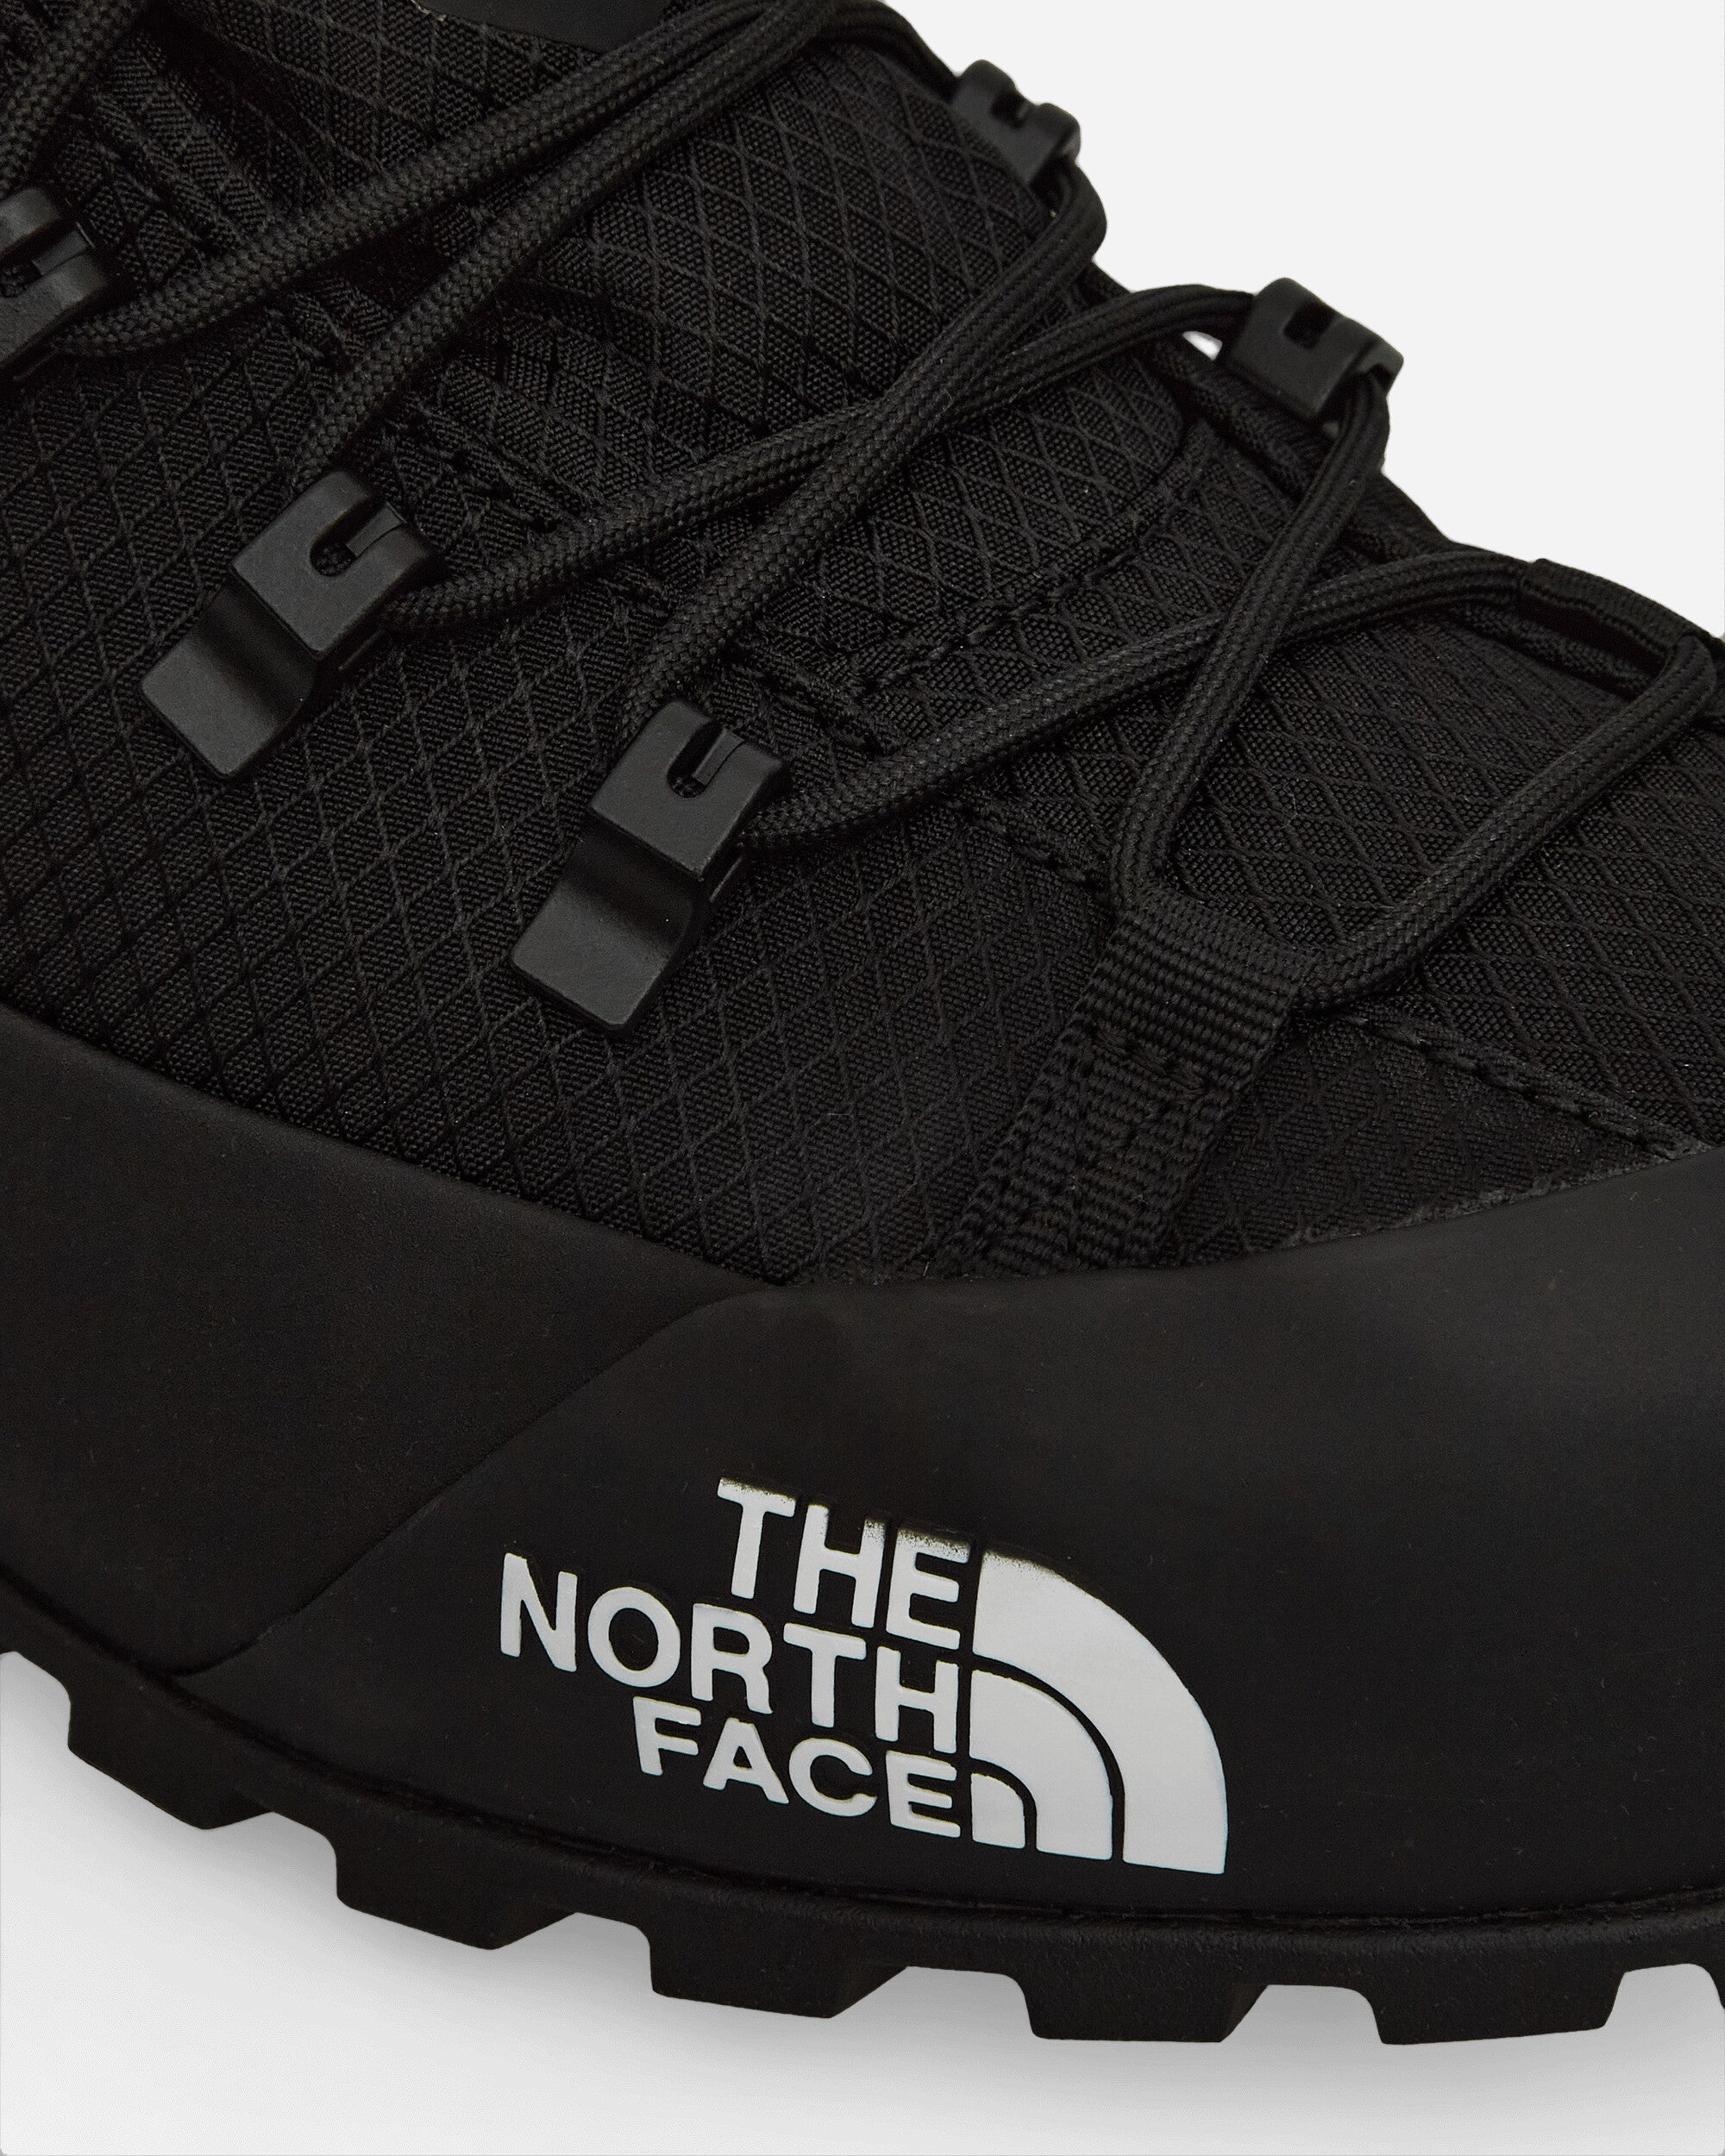 The North Face Glenclyffe Zip Tnf Black/Tnf Black Boots Hiking NF0A817A KX71 